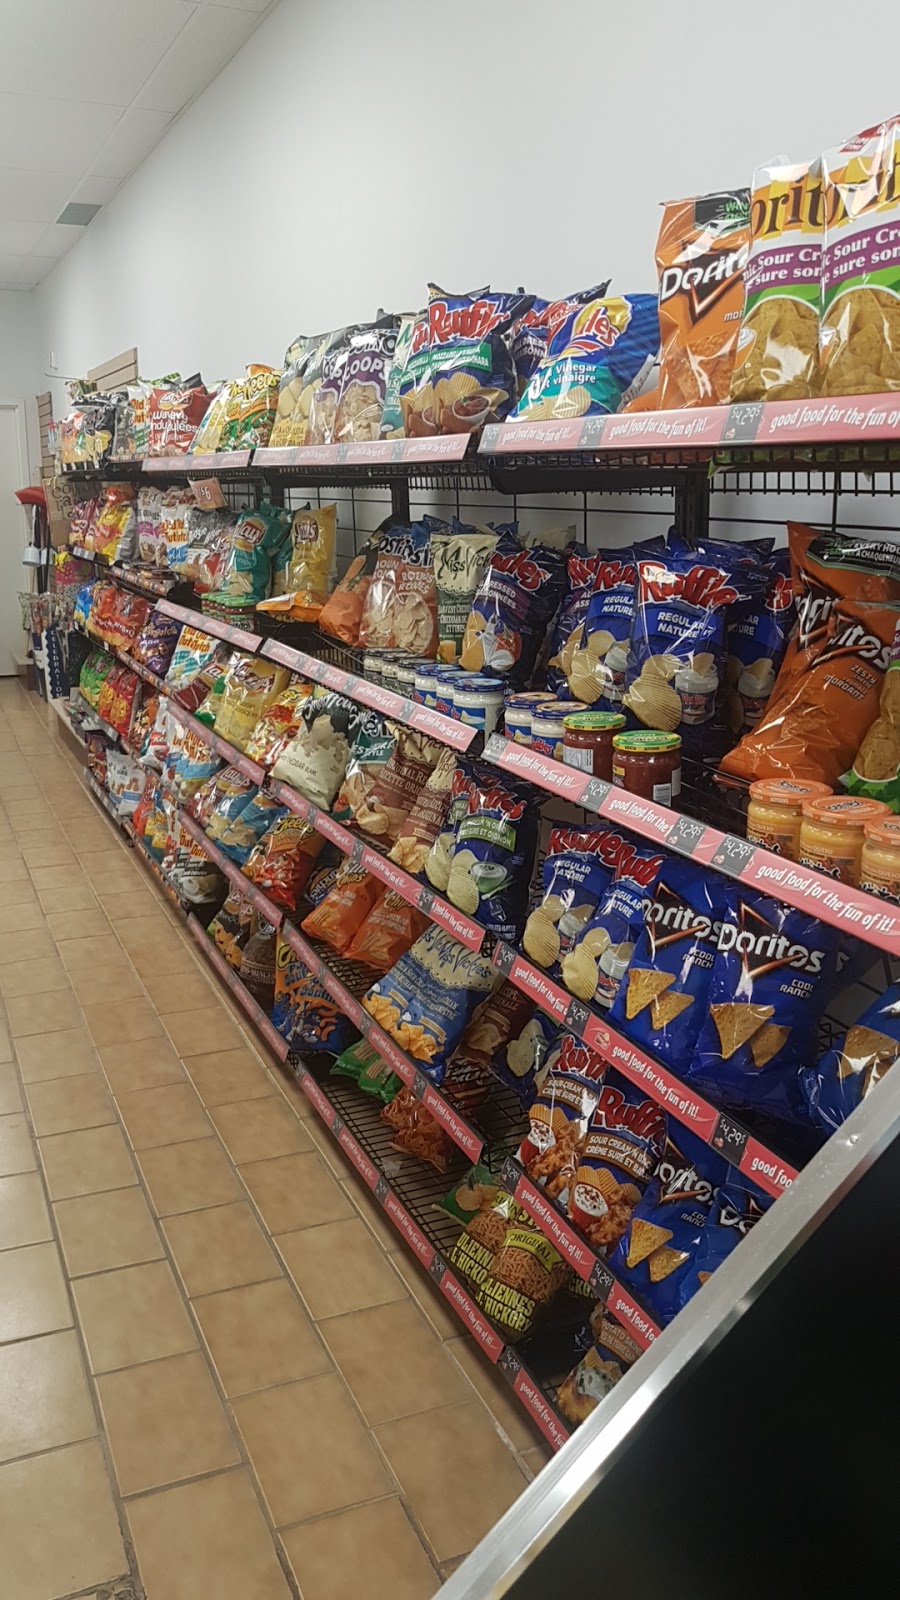 Market Place Food Mart | 650 Scottsdale Dr Unit 3b, Guelph, ON N1G 4T7, Canada | Phone: (519) 822-0202